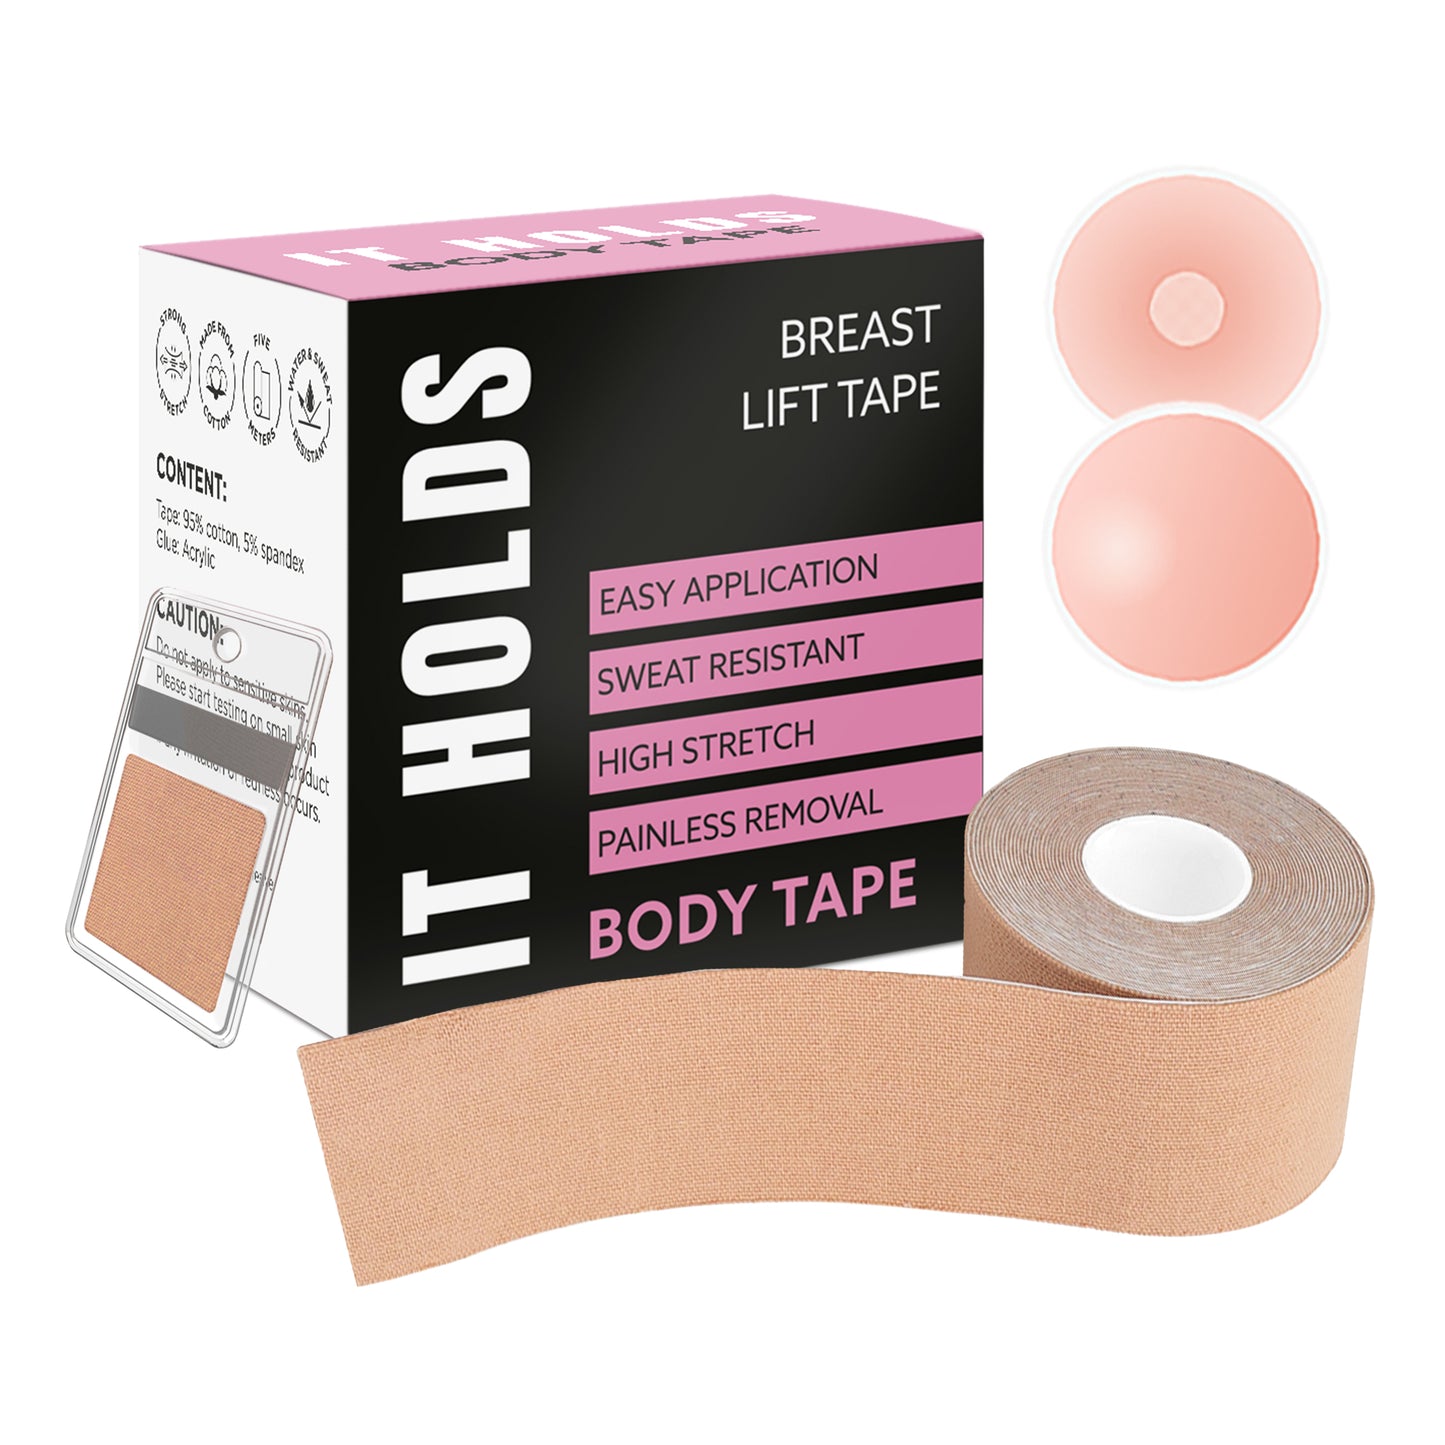 What Is Best Body Tape? - EONBON Boob Tape